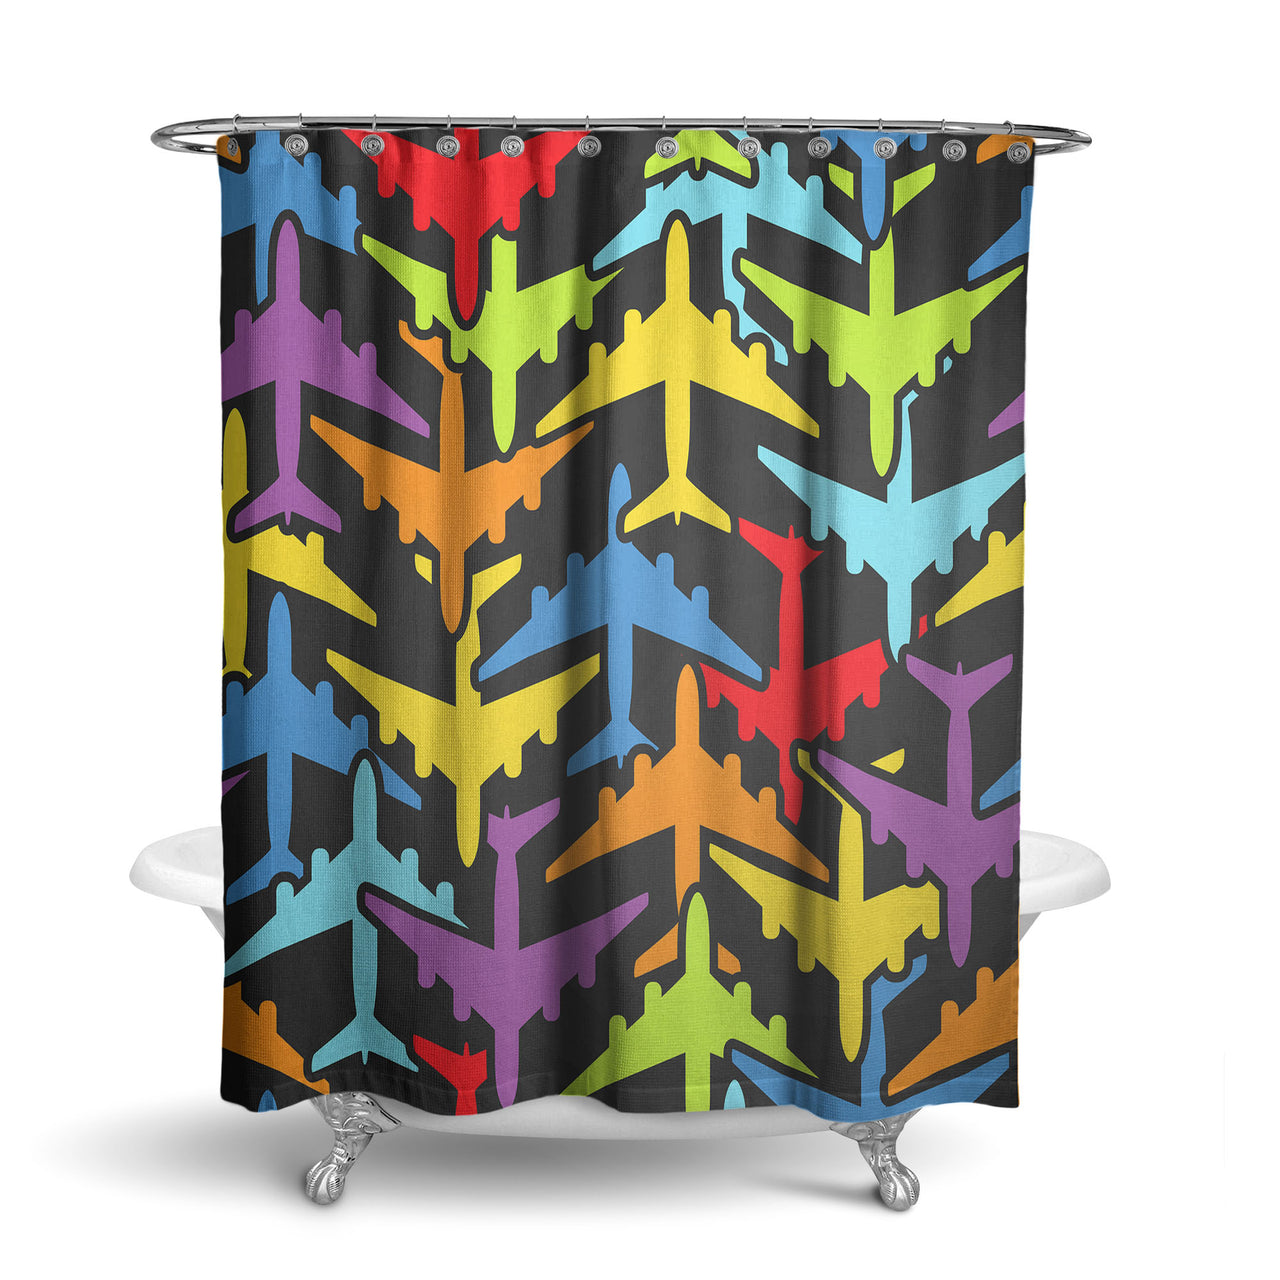 Super Colourful Airplanes Designed Shower Curtains